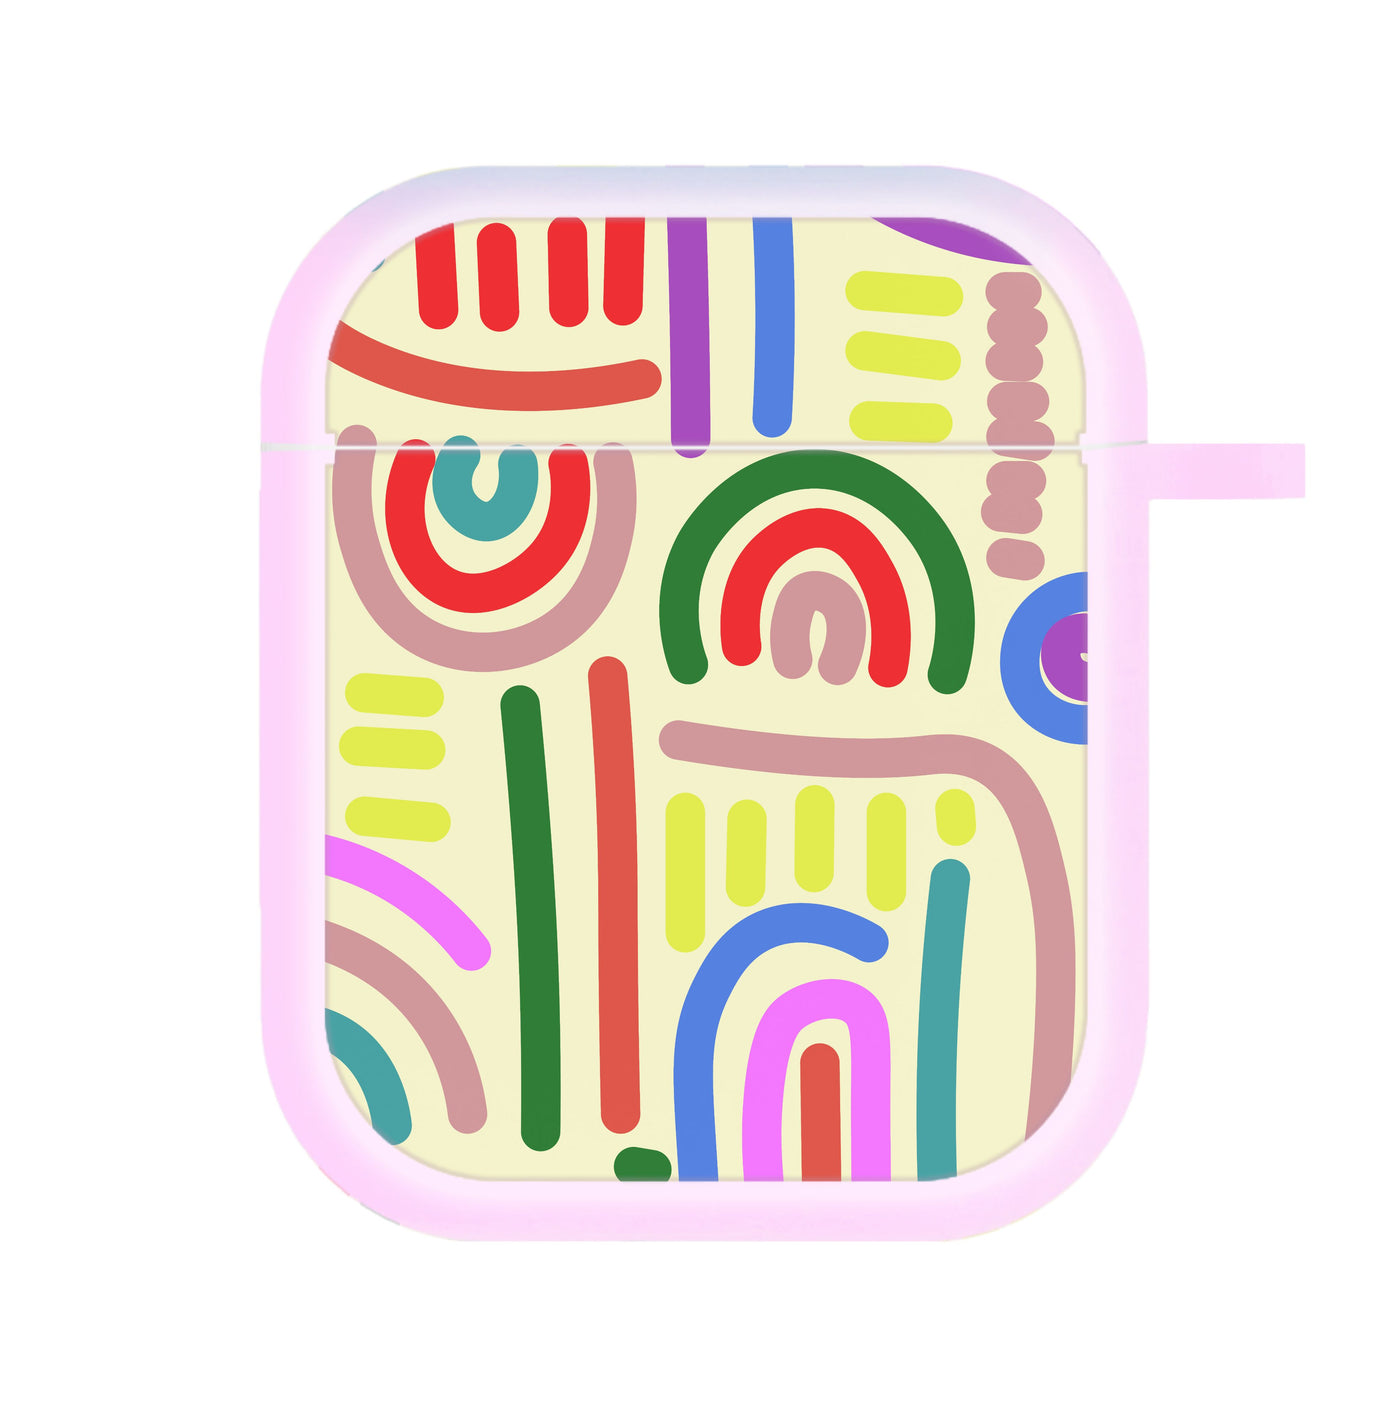 Abstract Patterns 23 AirPods Case